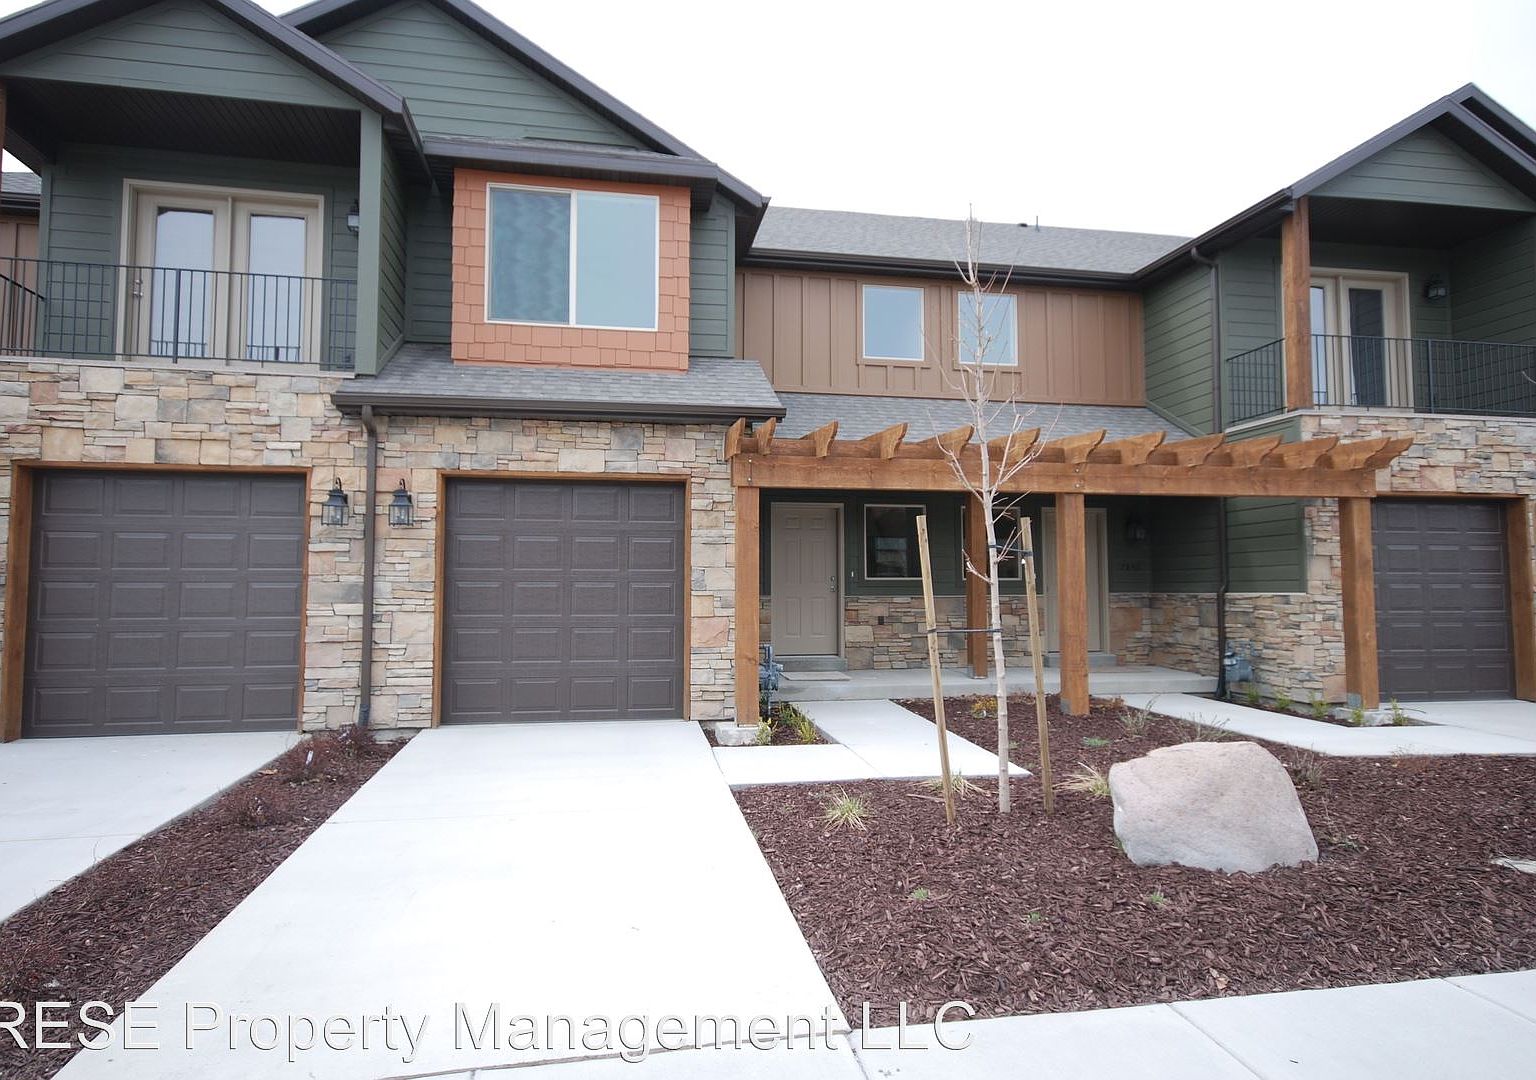 7850 S Spring Station Way, Midvale, UT 84047 | Zillow